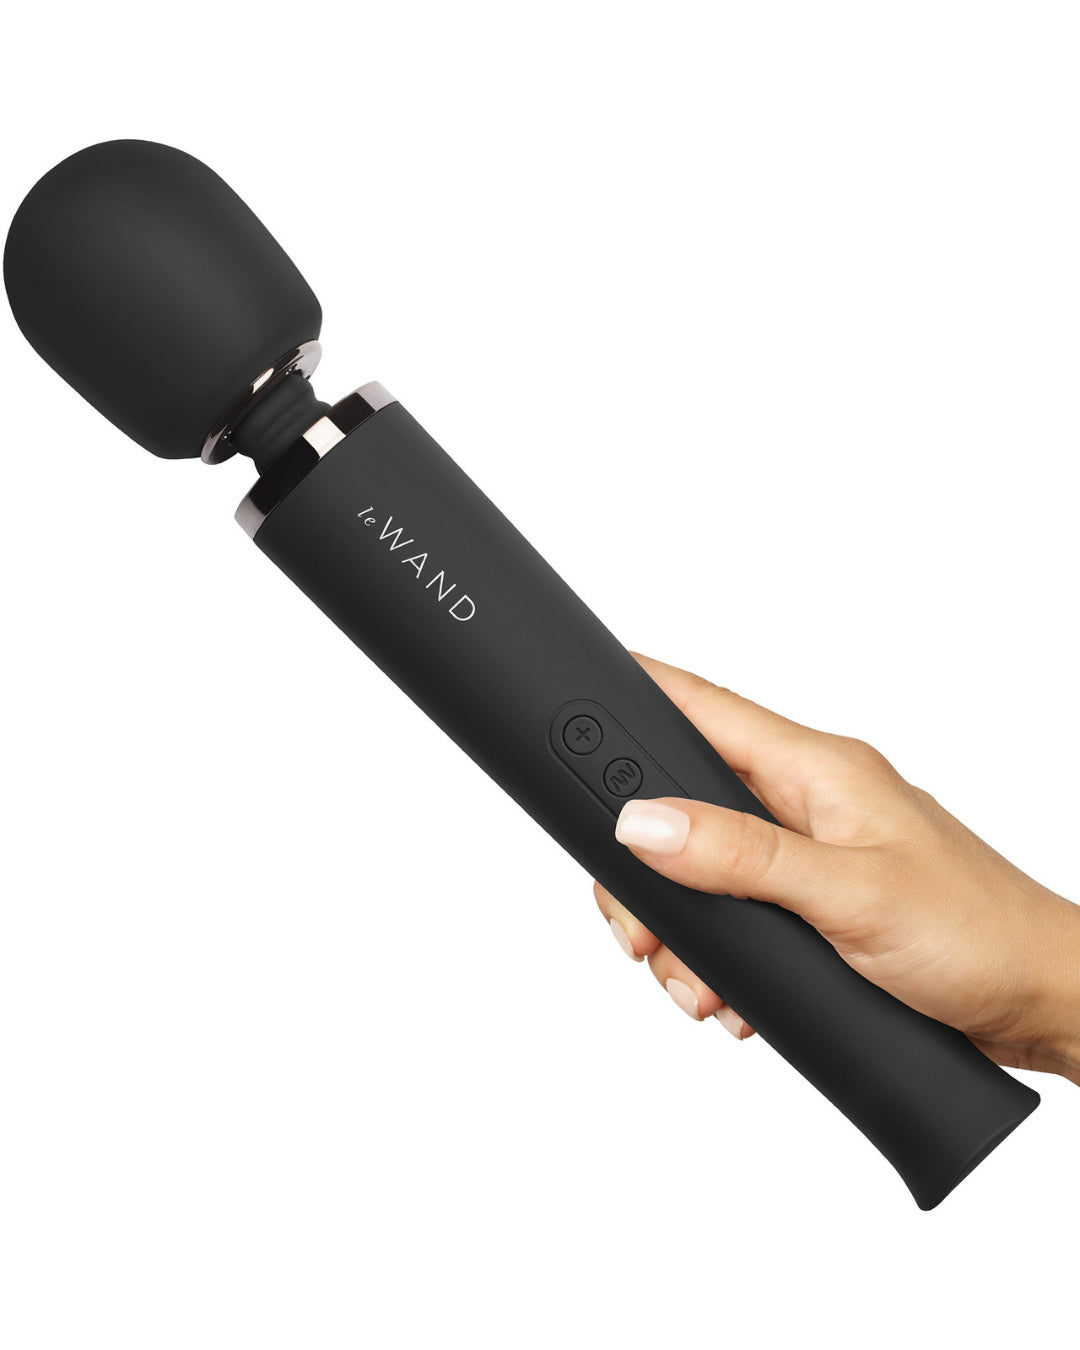 Le Wand Cordless Vibrating Massager - Black held in a person's hand to show the size